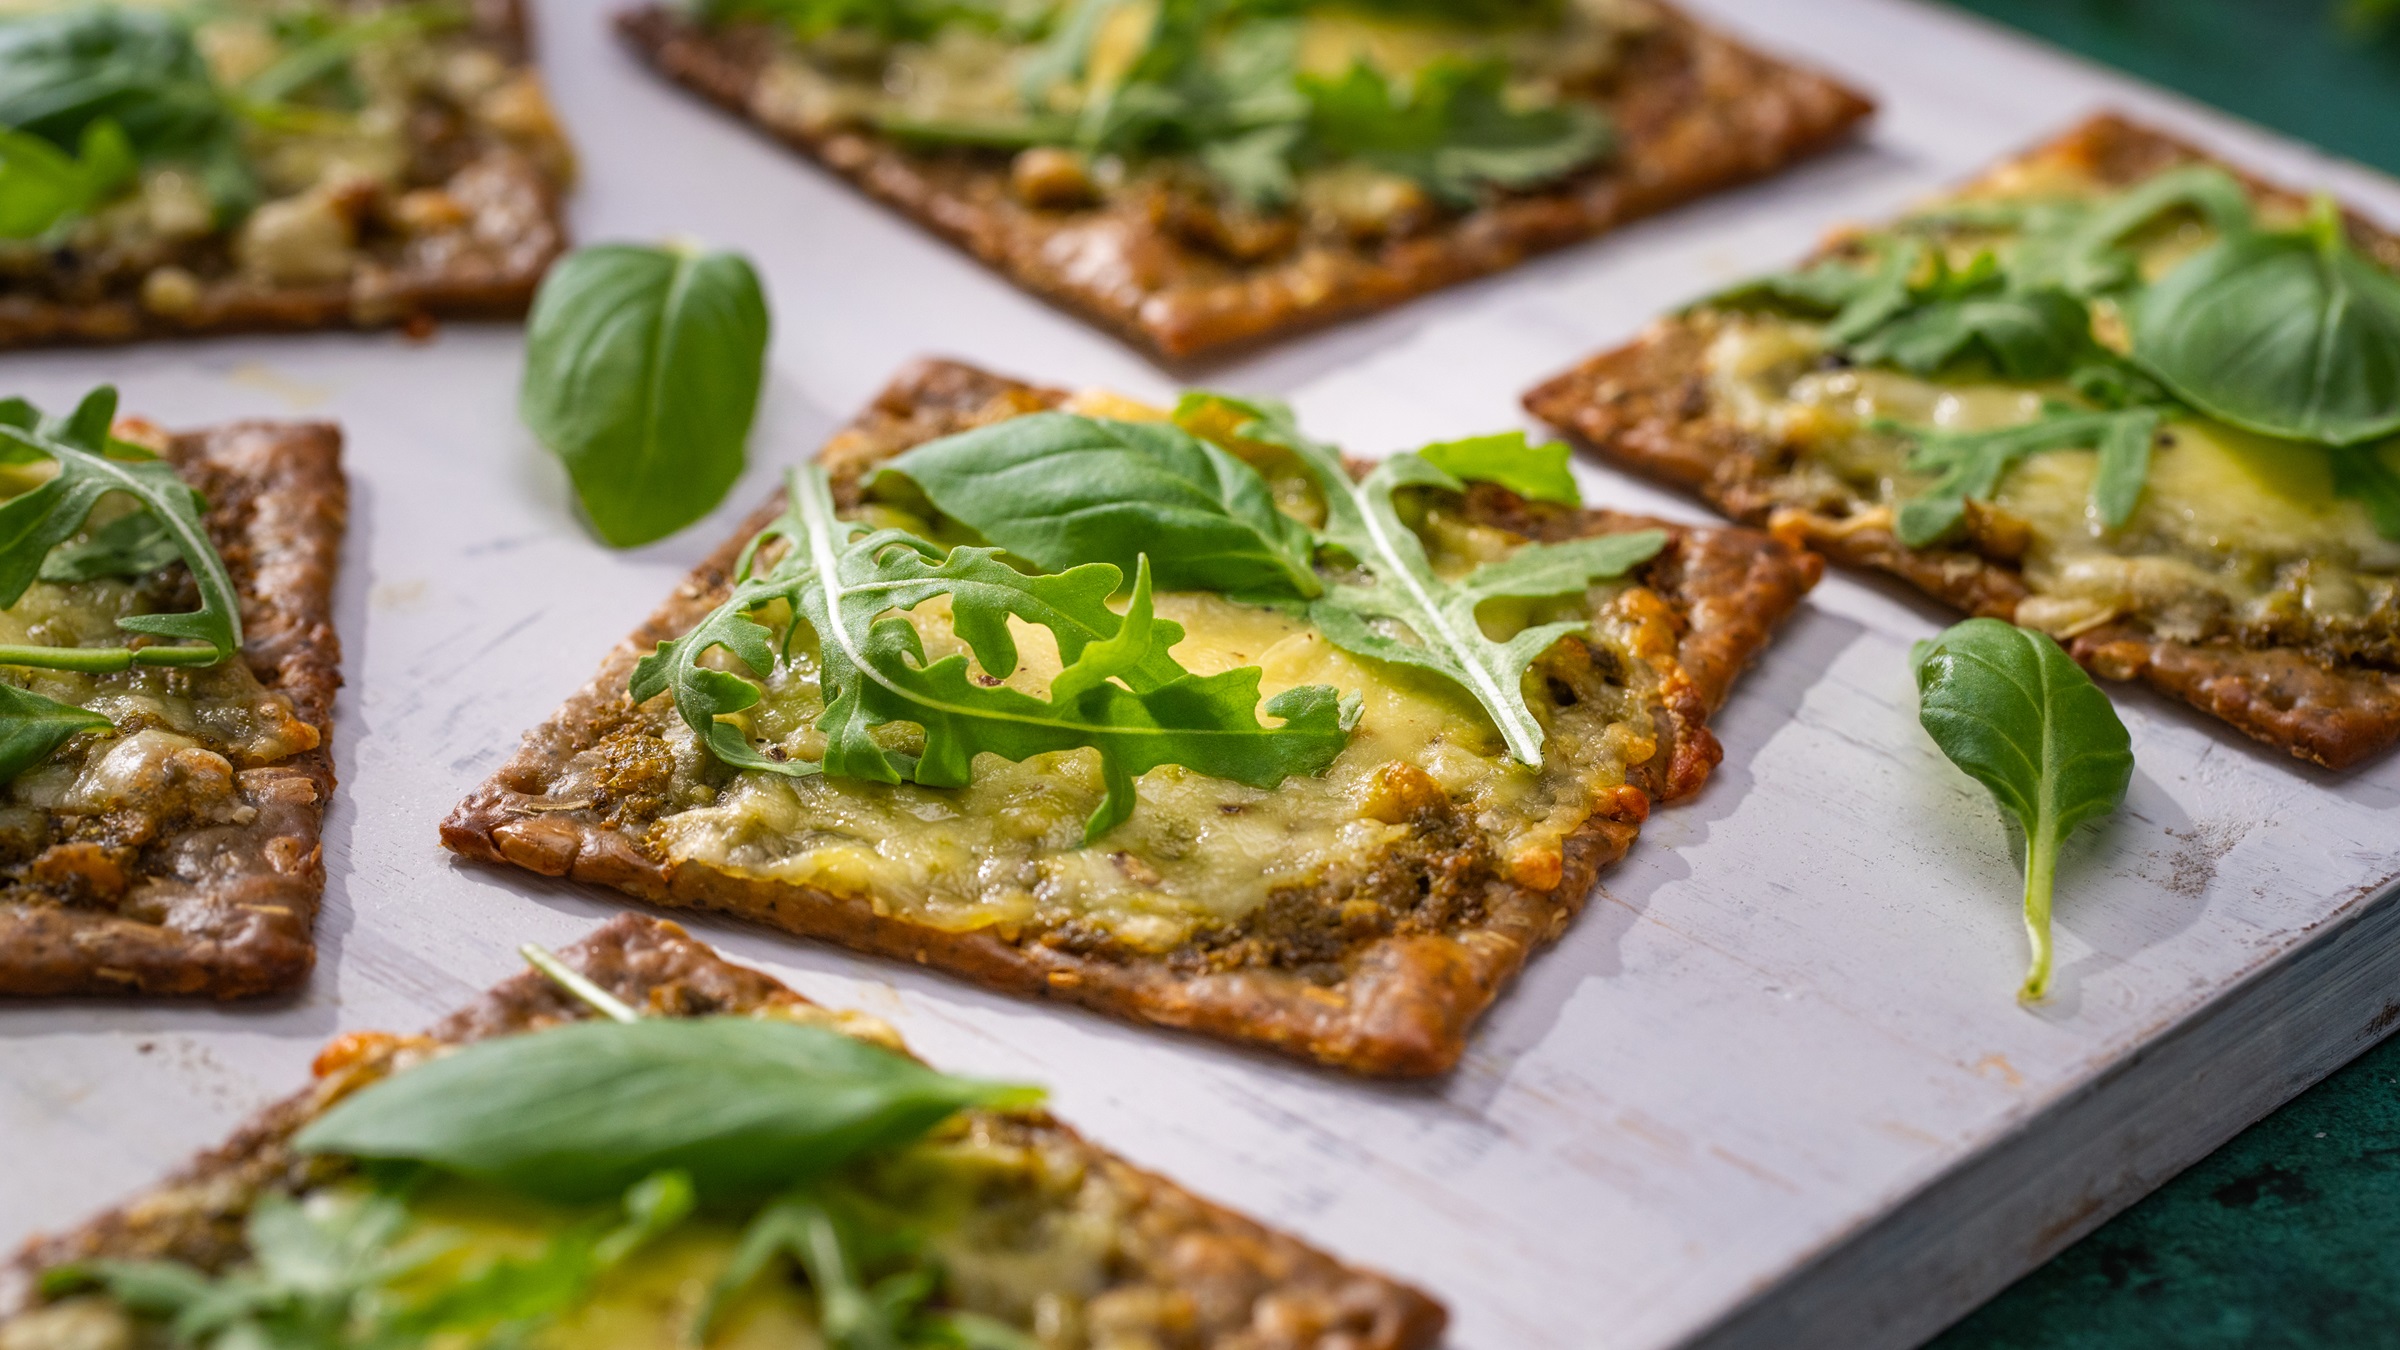 Five square crackers topped with cheese and green rocket leaves on white board.